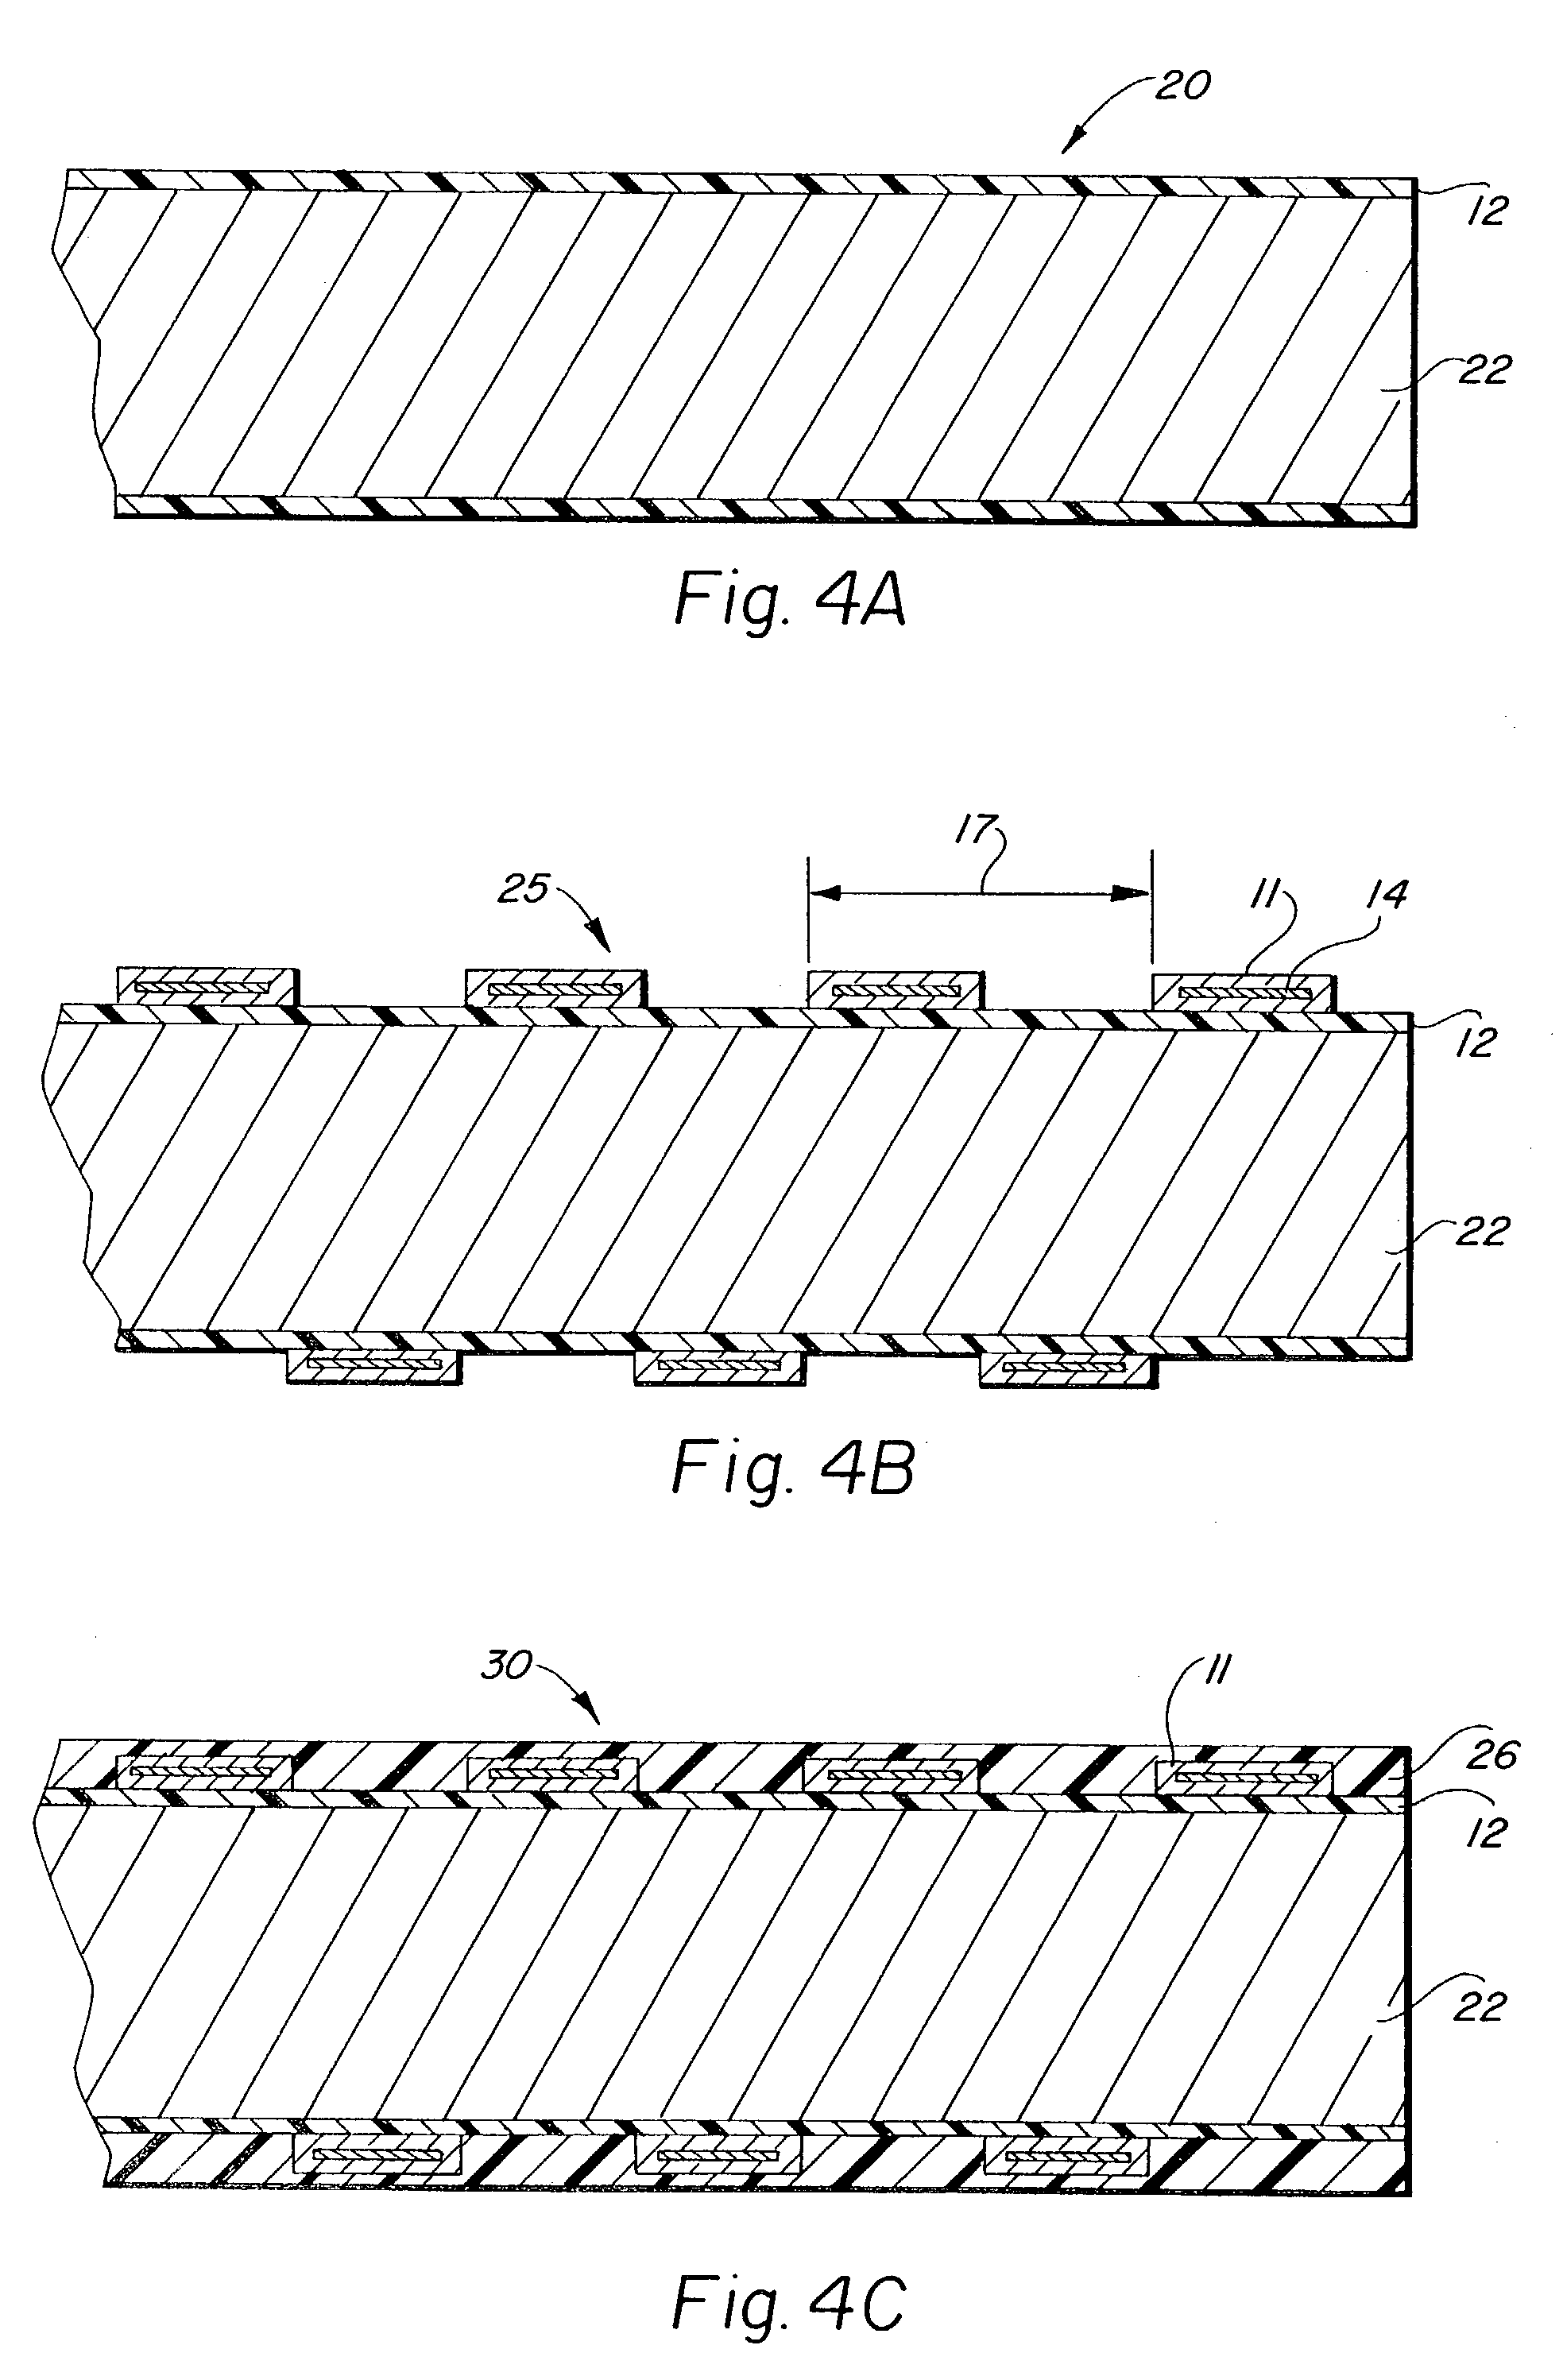 Methods for making a supported graft